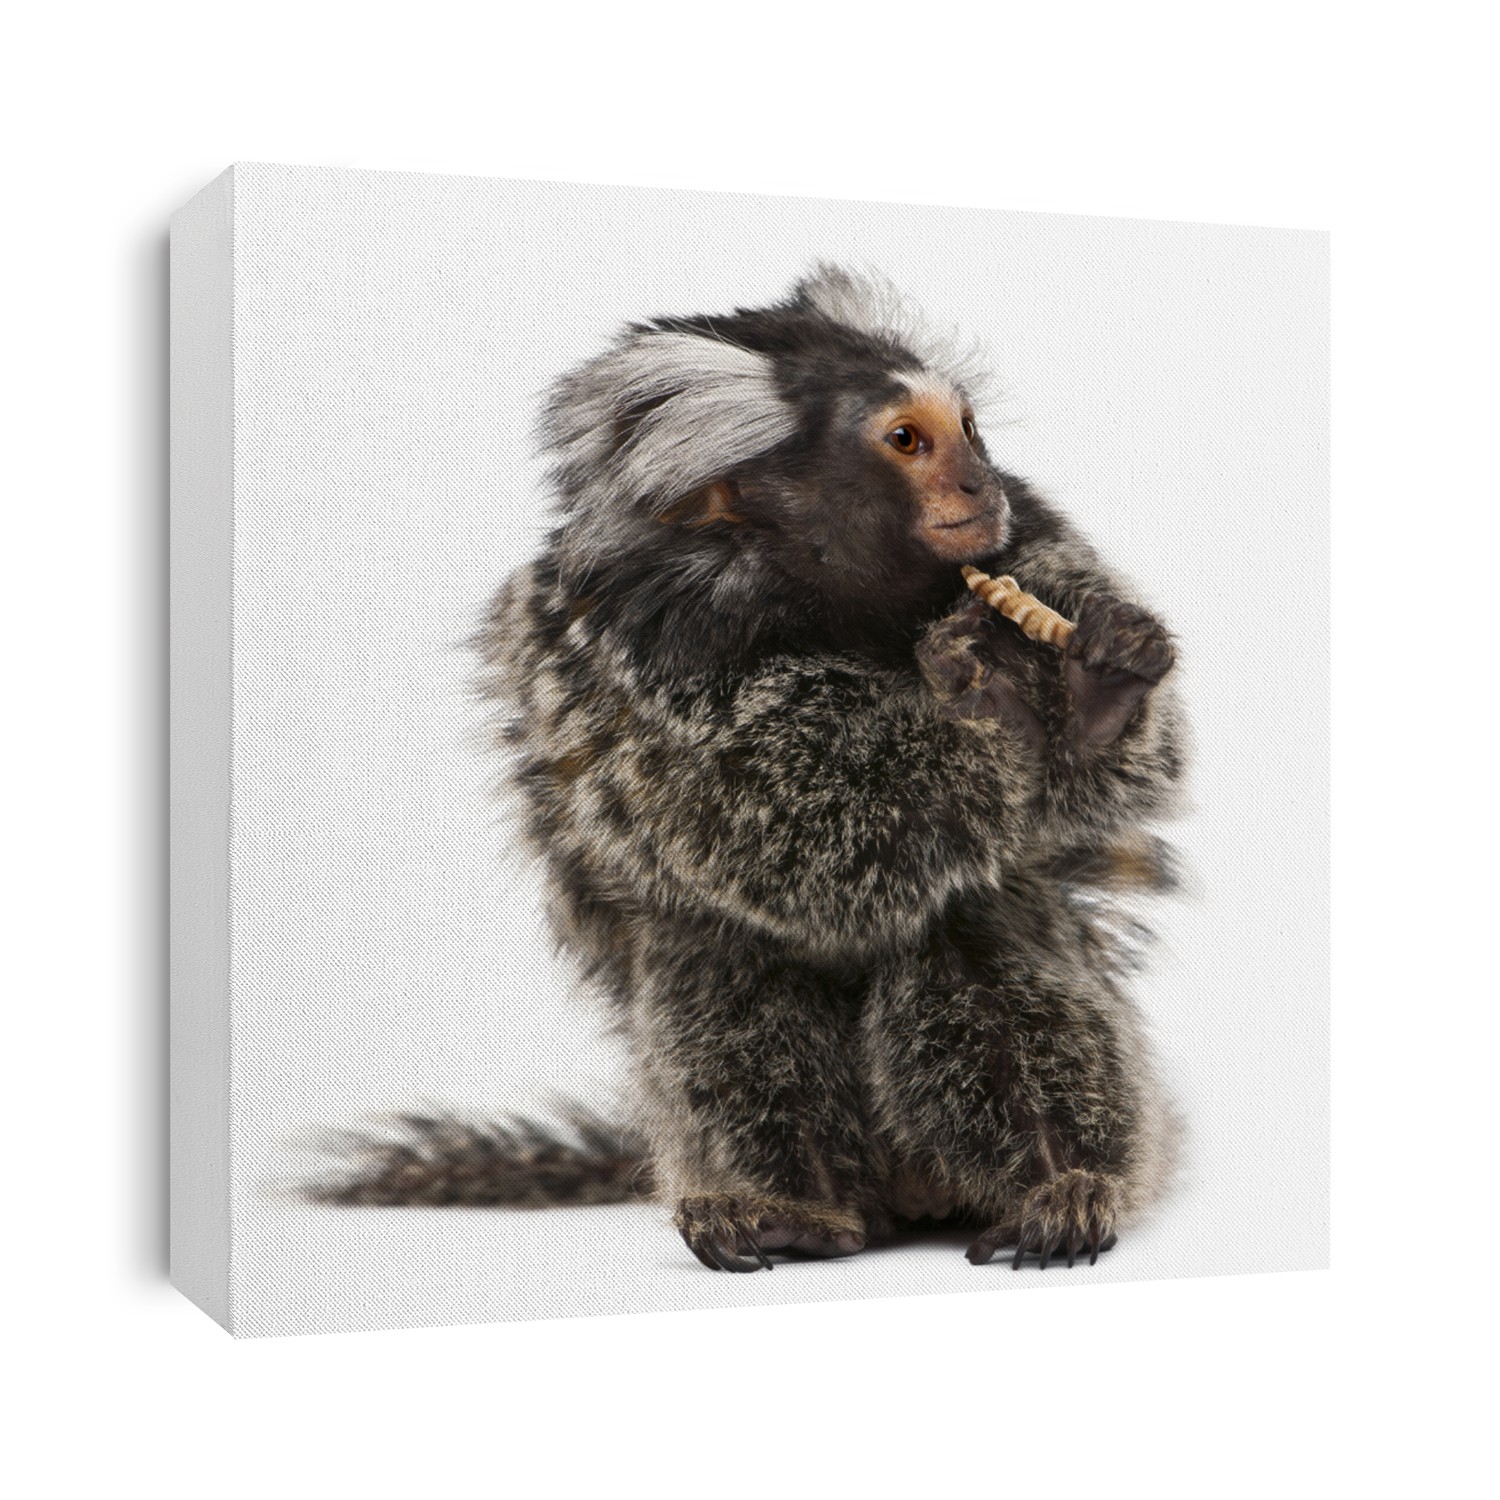 Common Marmoset, Callithrix jacchus, 2 years old, eating worm in front of white background